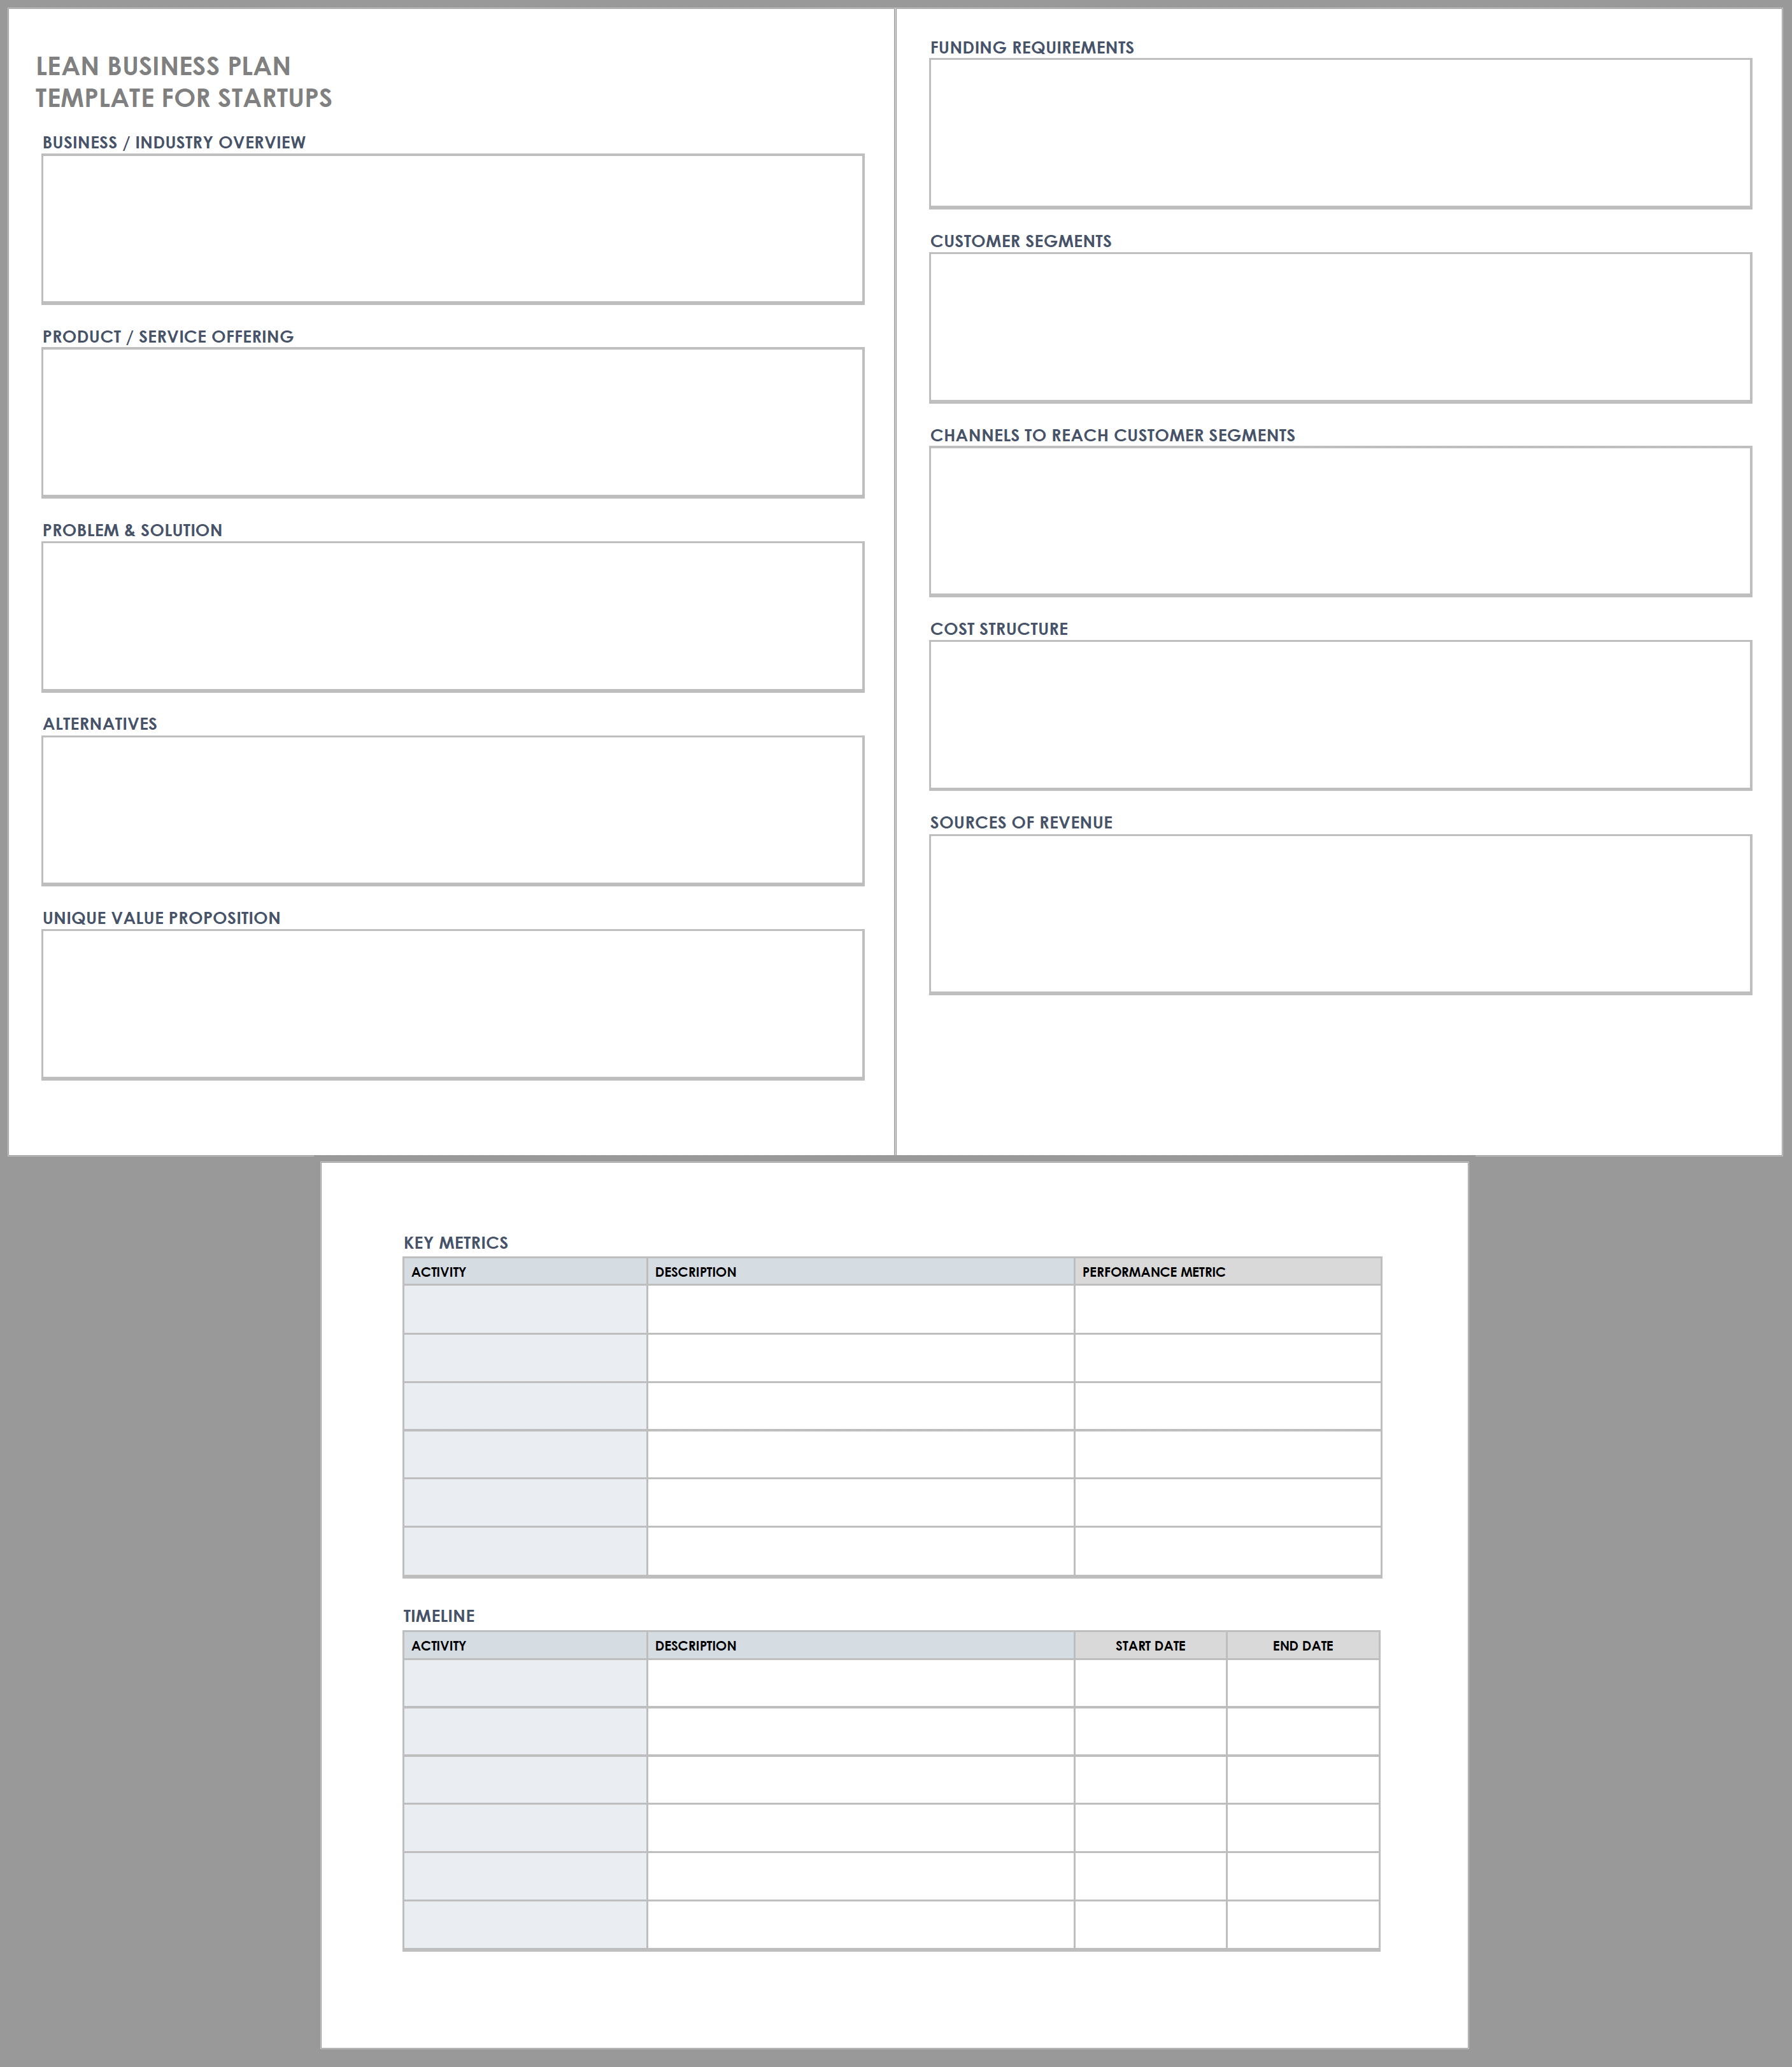 Lean Business Plan Templates for Startups 